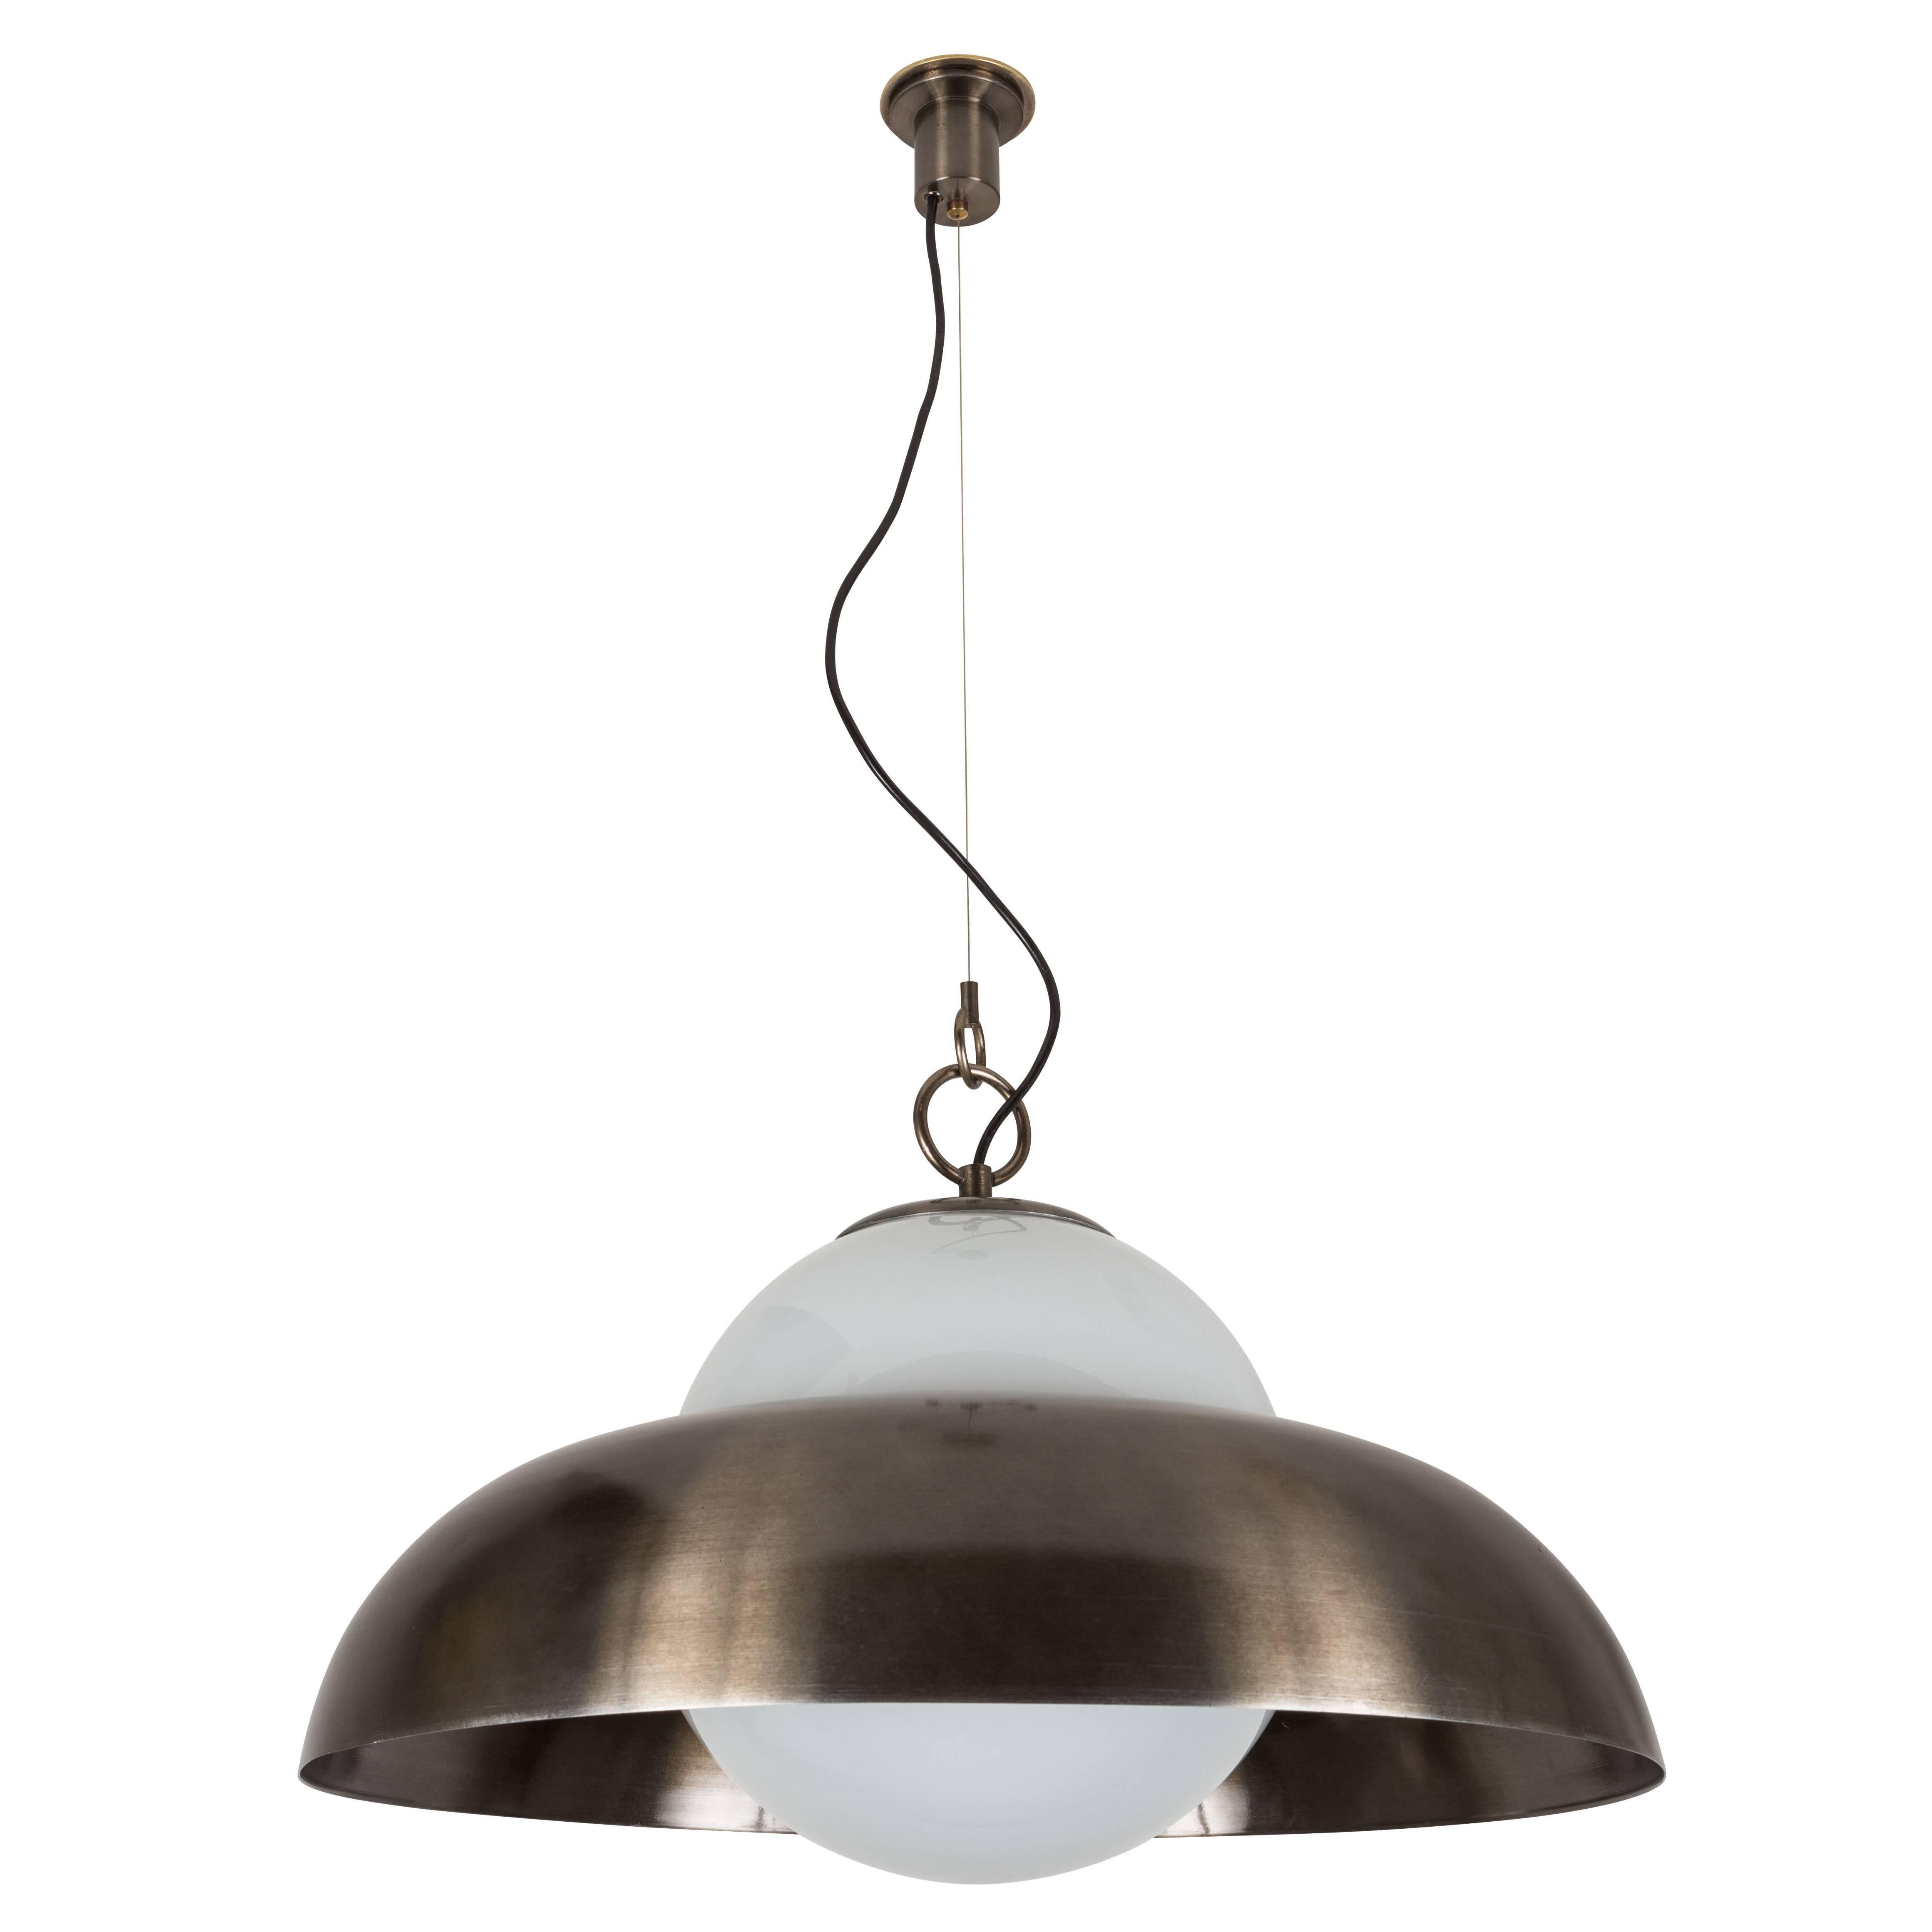 Model A288 Suspension Lamp by Sergio Asti for Candle